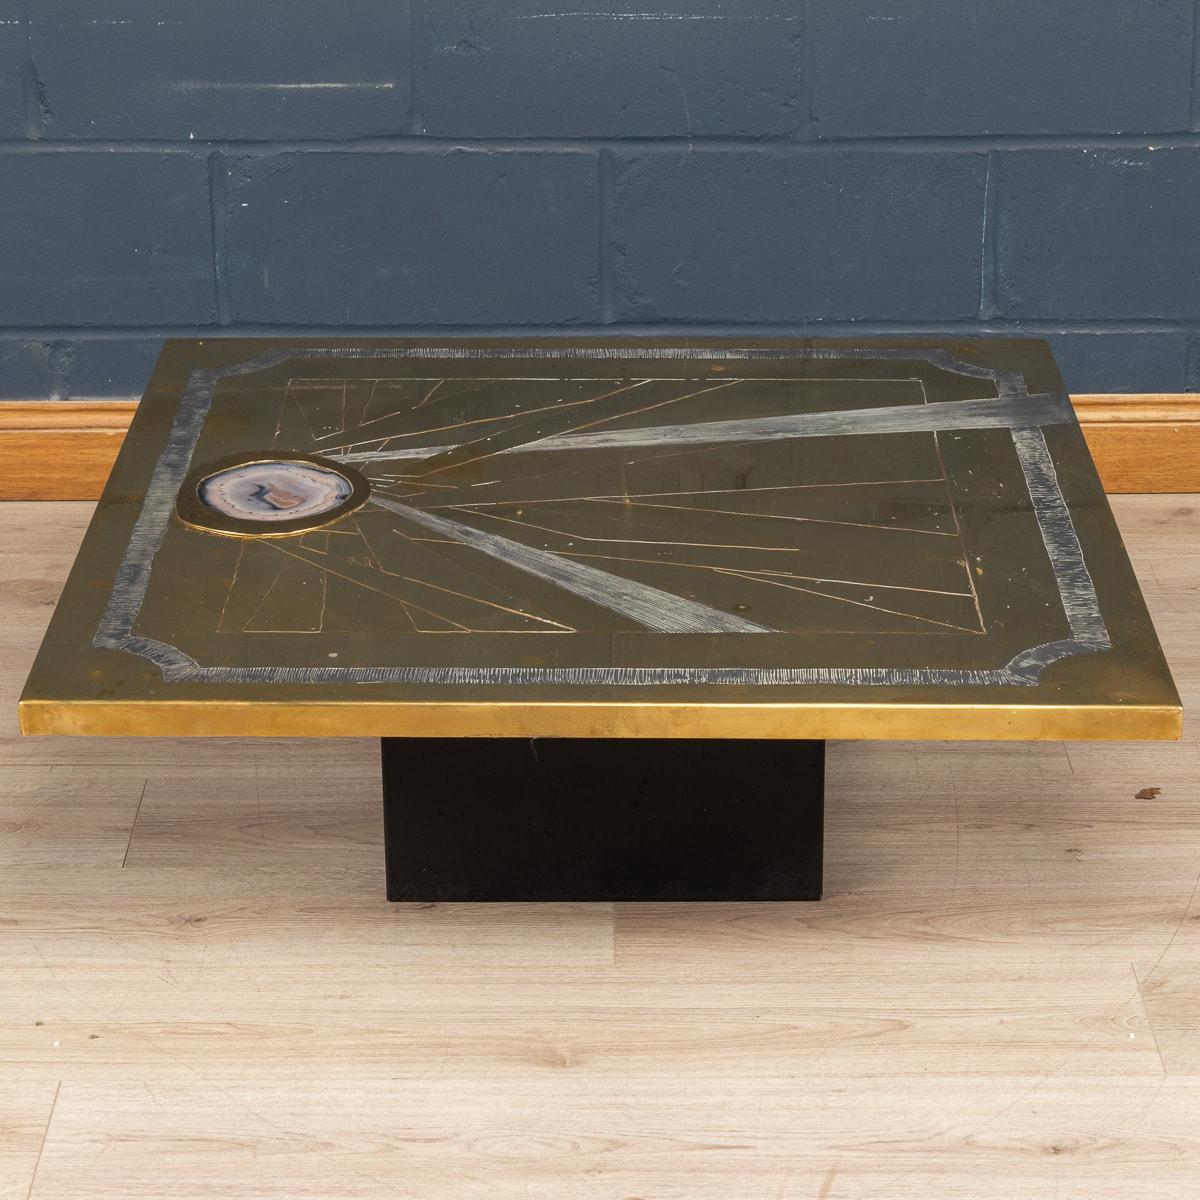 A rare and unusual coffee table by Willy Daro, made in Belgium in the 1970s. The coffee table embossed and acid etched on brass with an agate inset and abstract motifs. Signed 